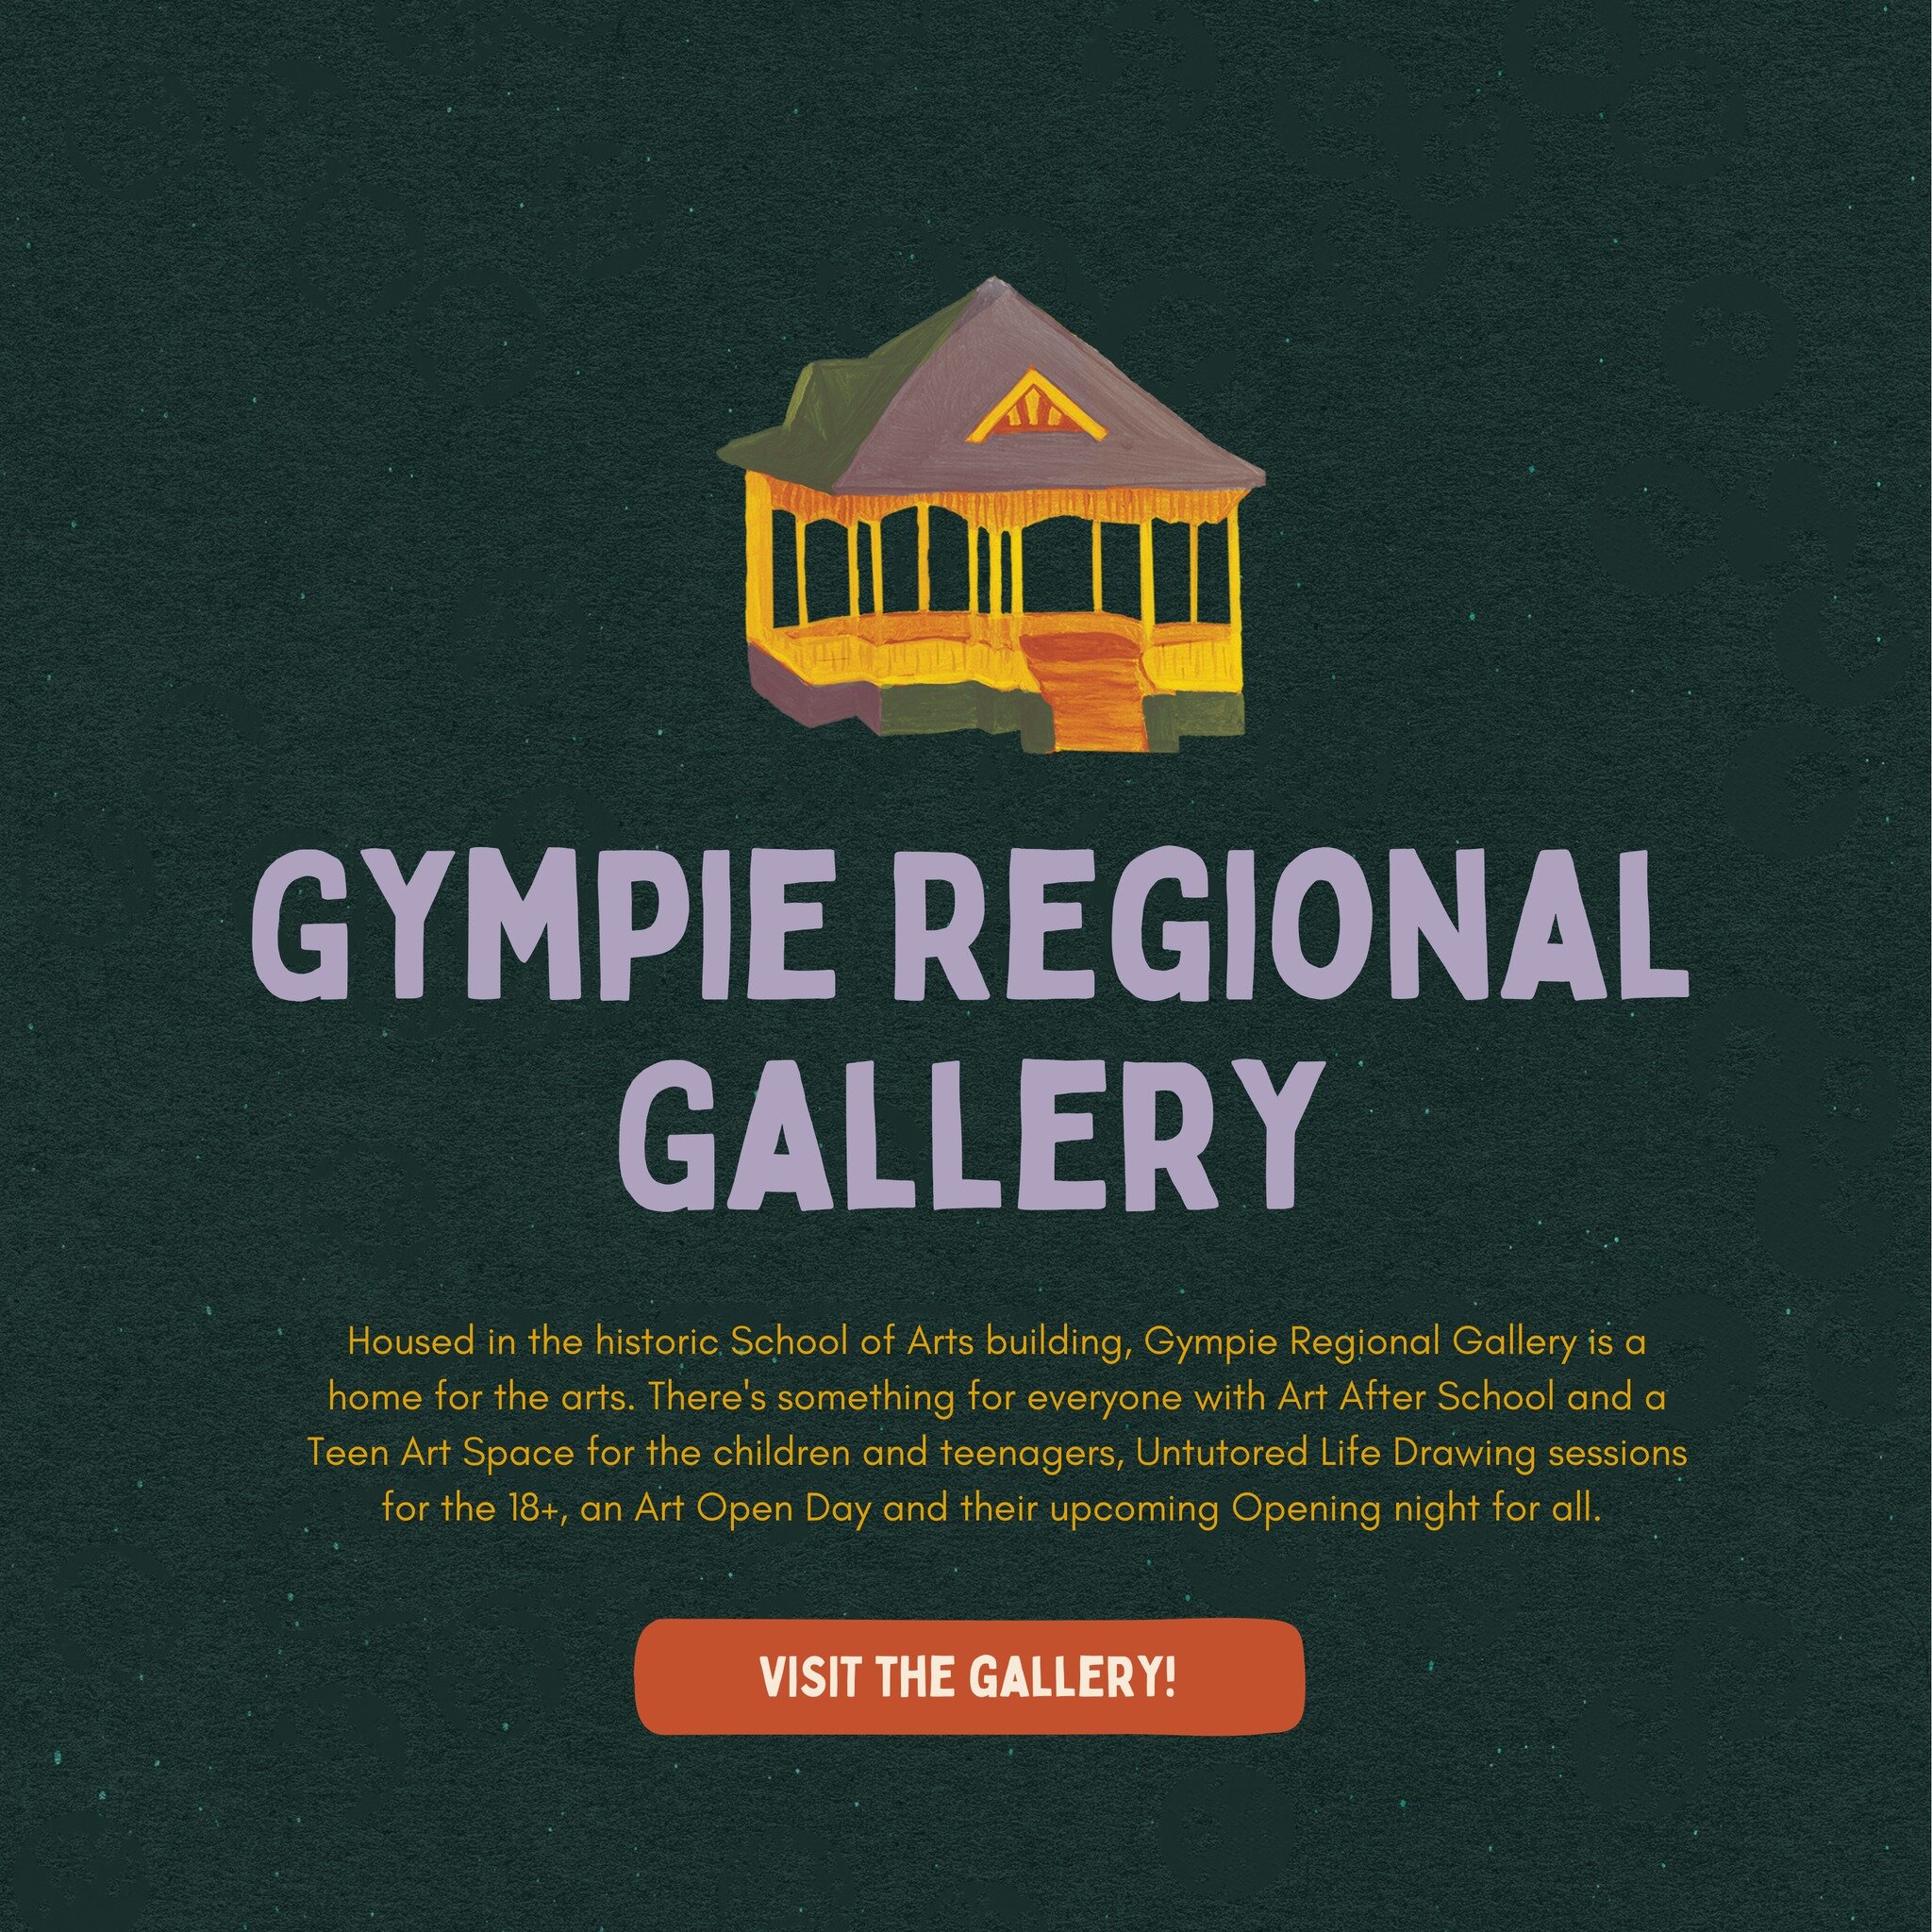 Whilst we continue to struggle with some post-HOGISFF blues, thankfully, we have something to help lift our spirits. 

Thanks to the @gympieregionalgallery , there are still plenty of creative arts events around town to enjoy. Housed in the historic 